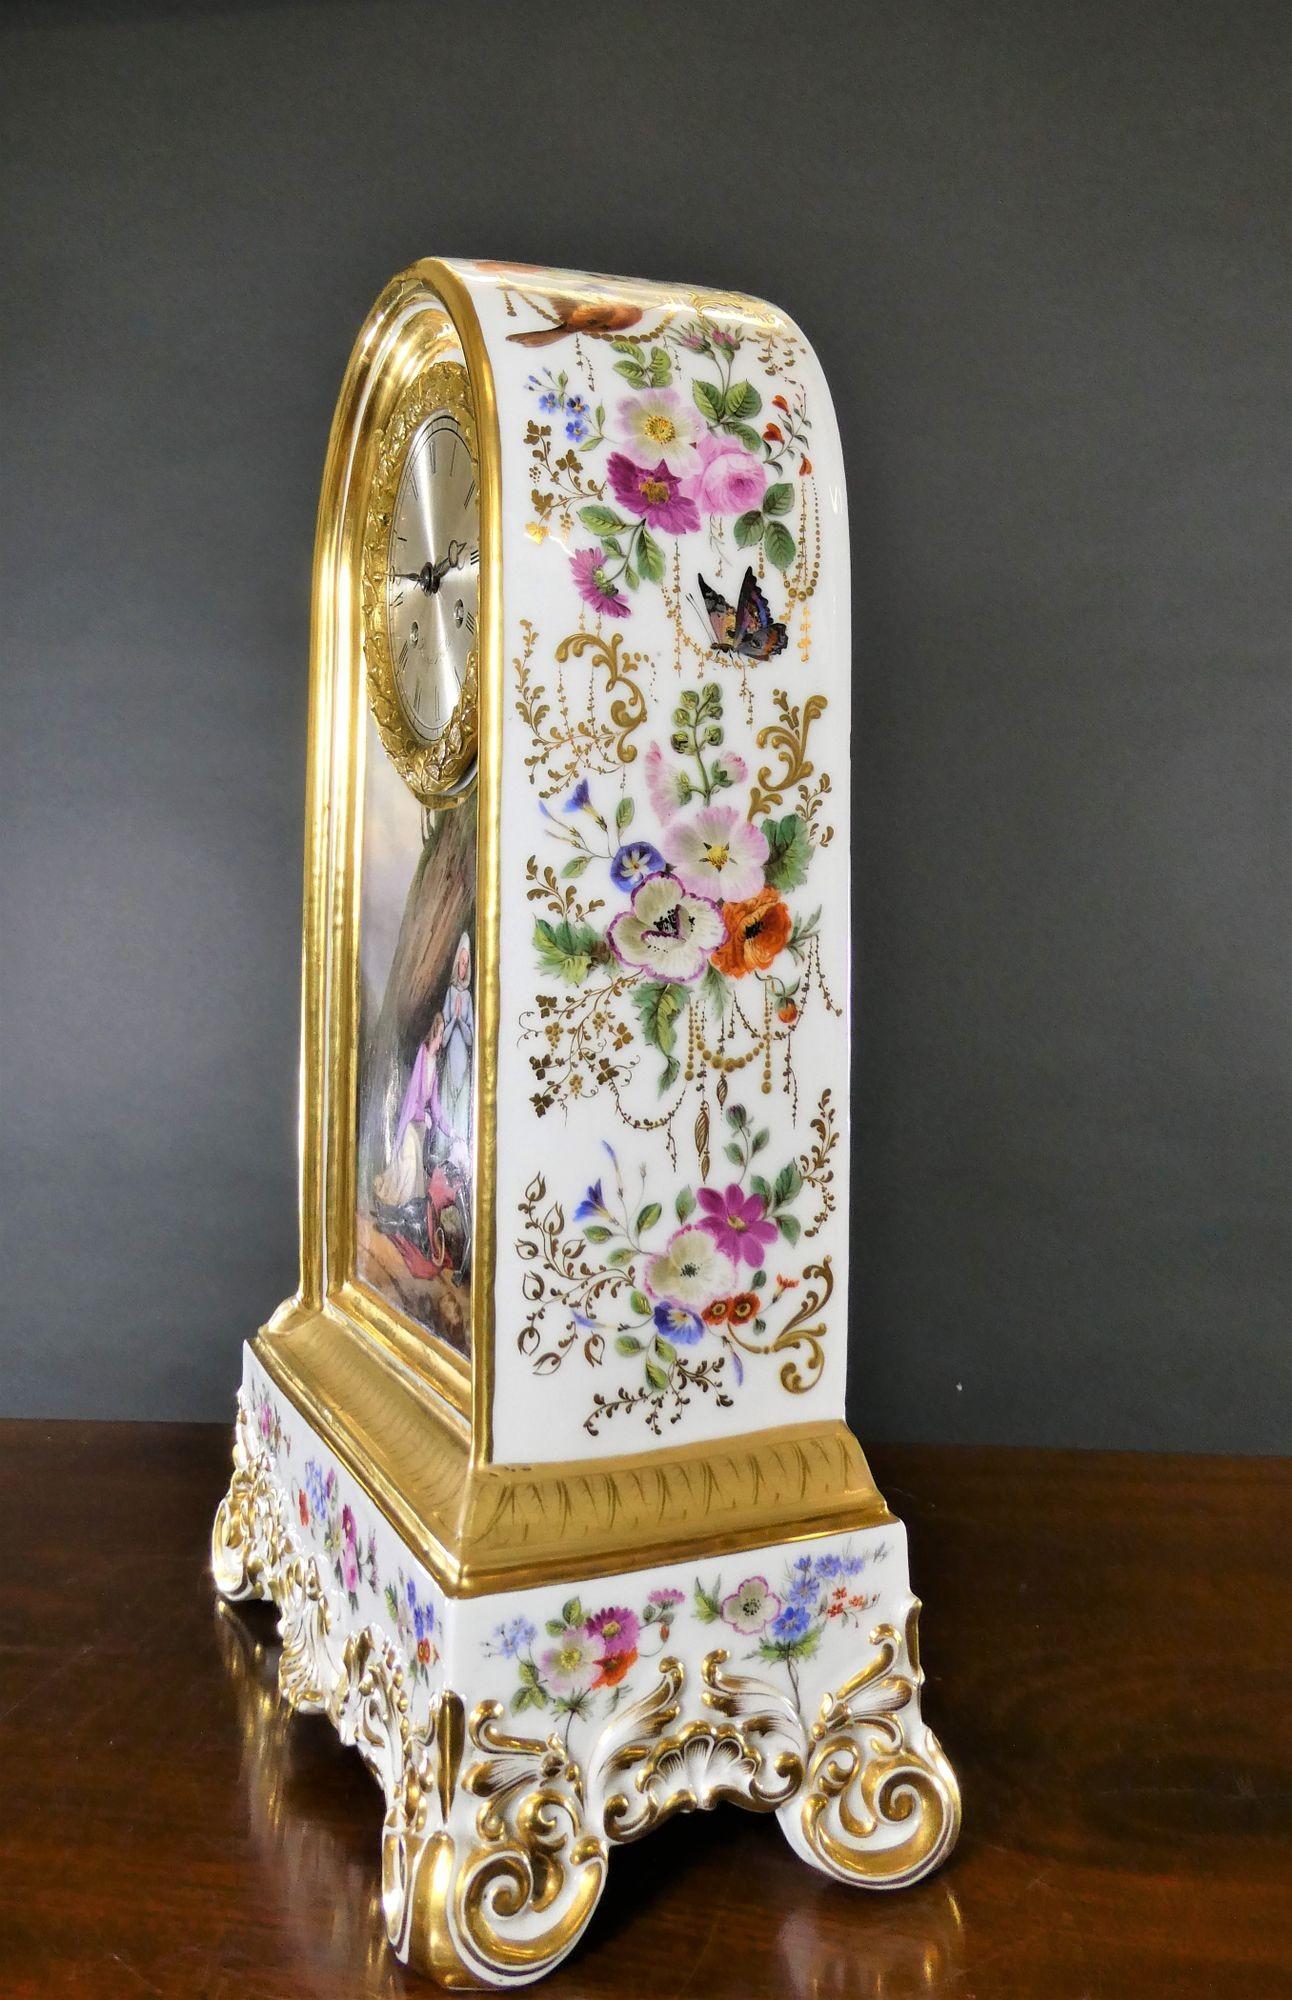 French Porcelain Mantel Clock by Raingo Freres, Paris In Good Condition For Sale In Norwich, GB